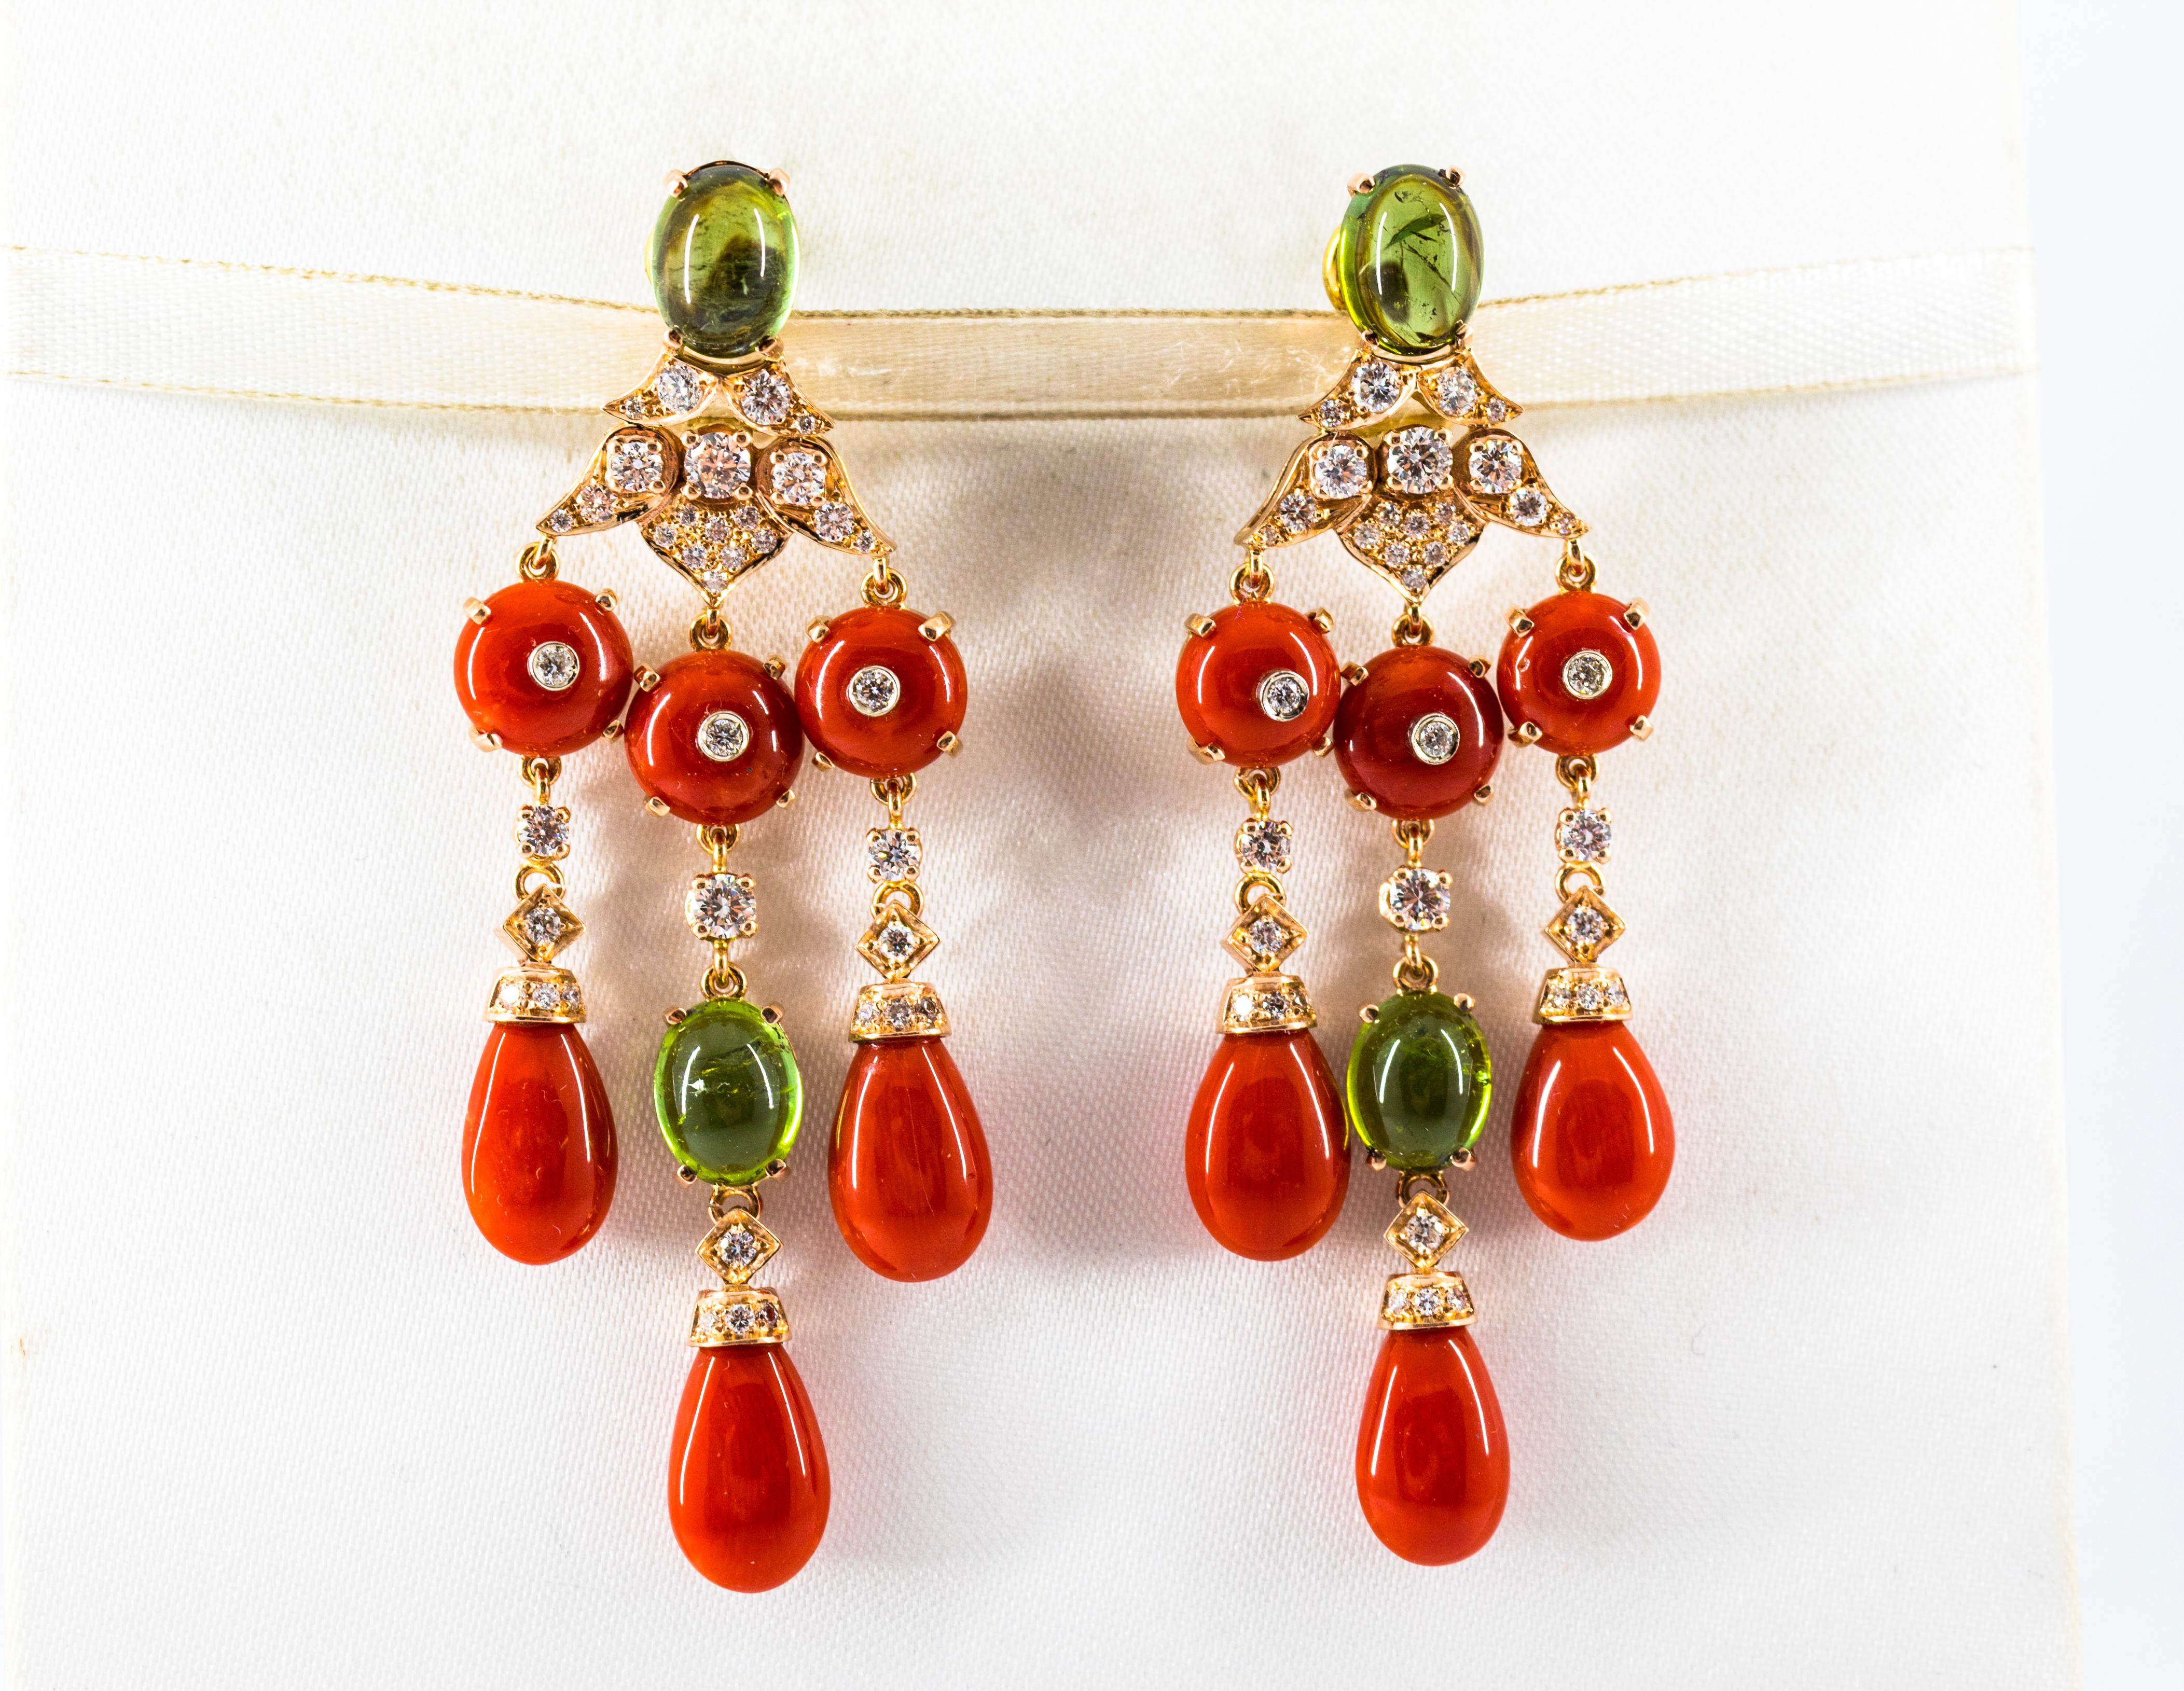 These Clip-On Drop Earrings are made of 14K Yellow Gold.
These Earrings have 1.80 Carats of White Modern Round Cut Diamonds.
These Earrings have 8.80 Carats of Green Cabochon Tourmalines.
These Earrings have Mediterranean (Sardinia, Italy) Red